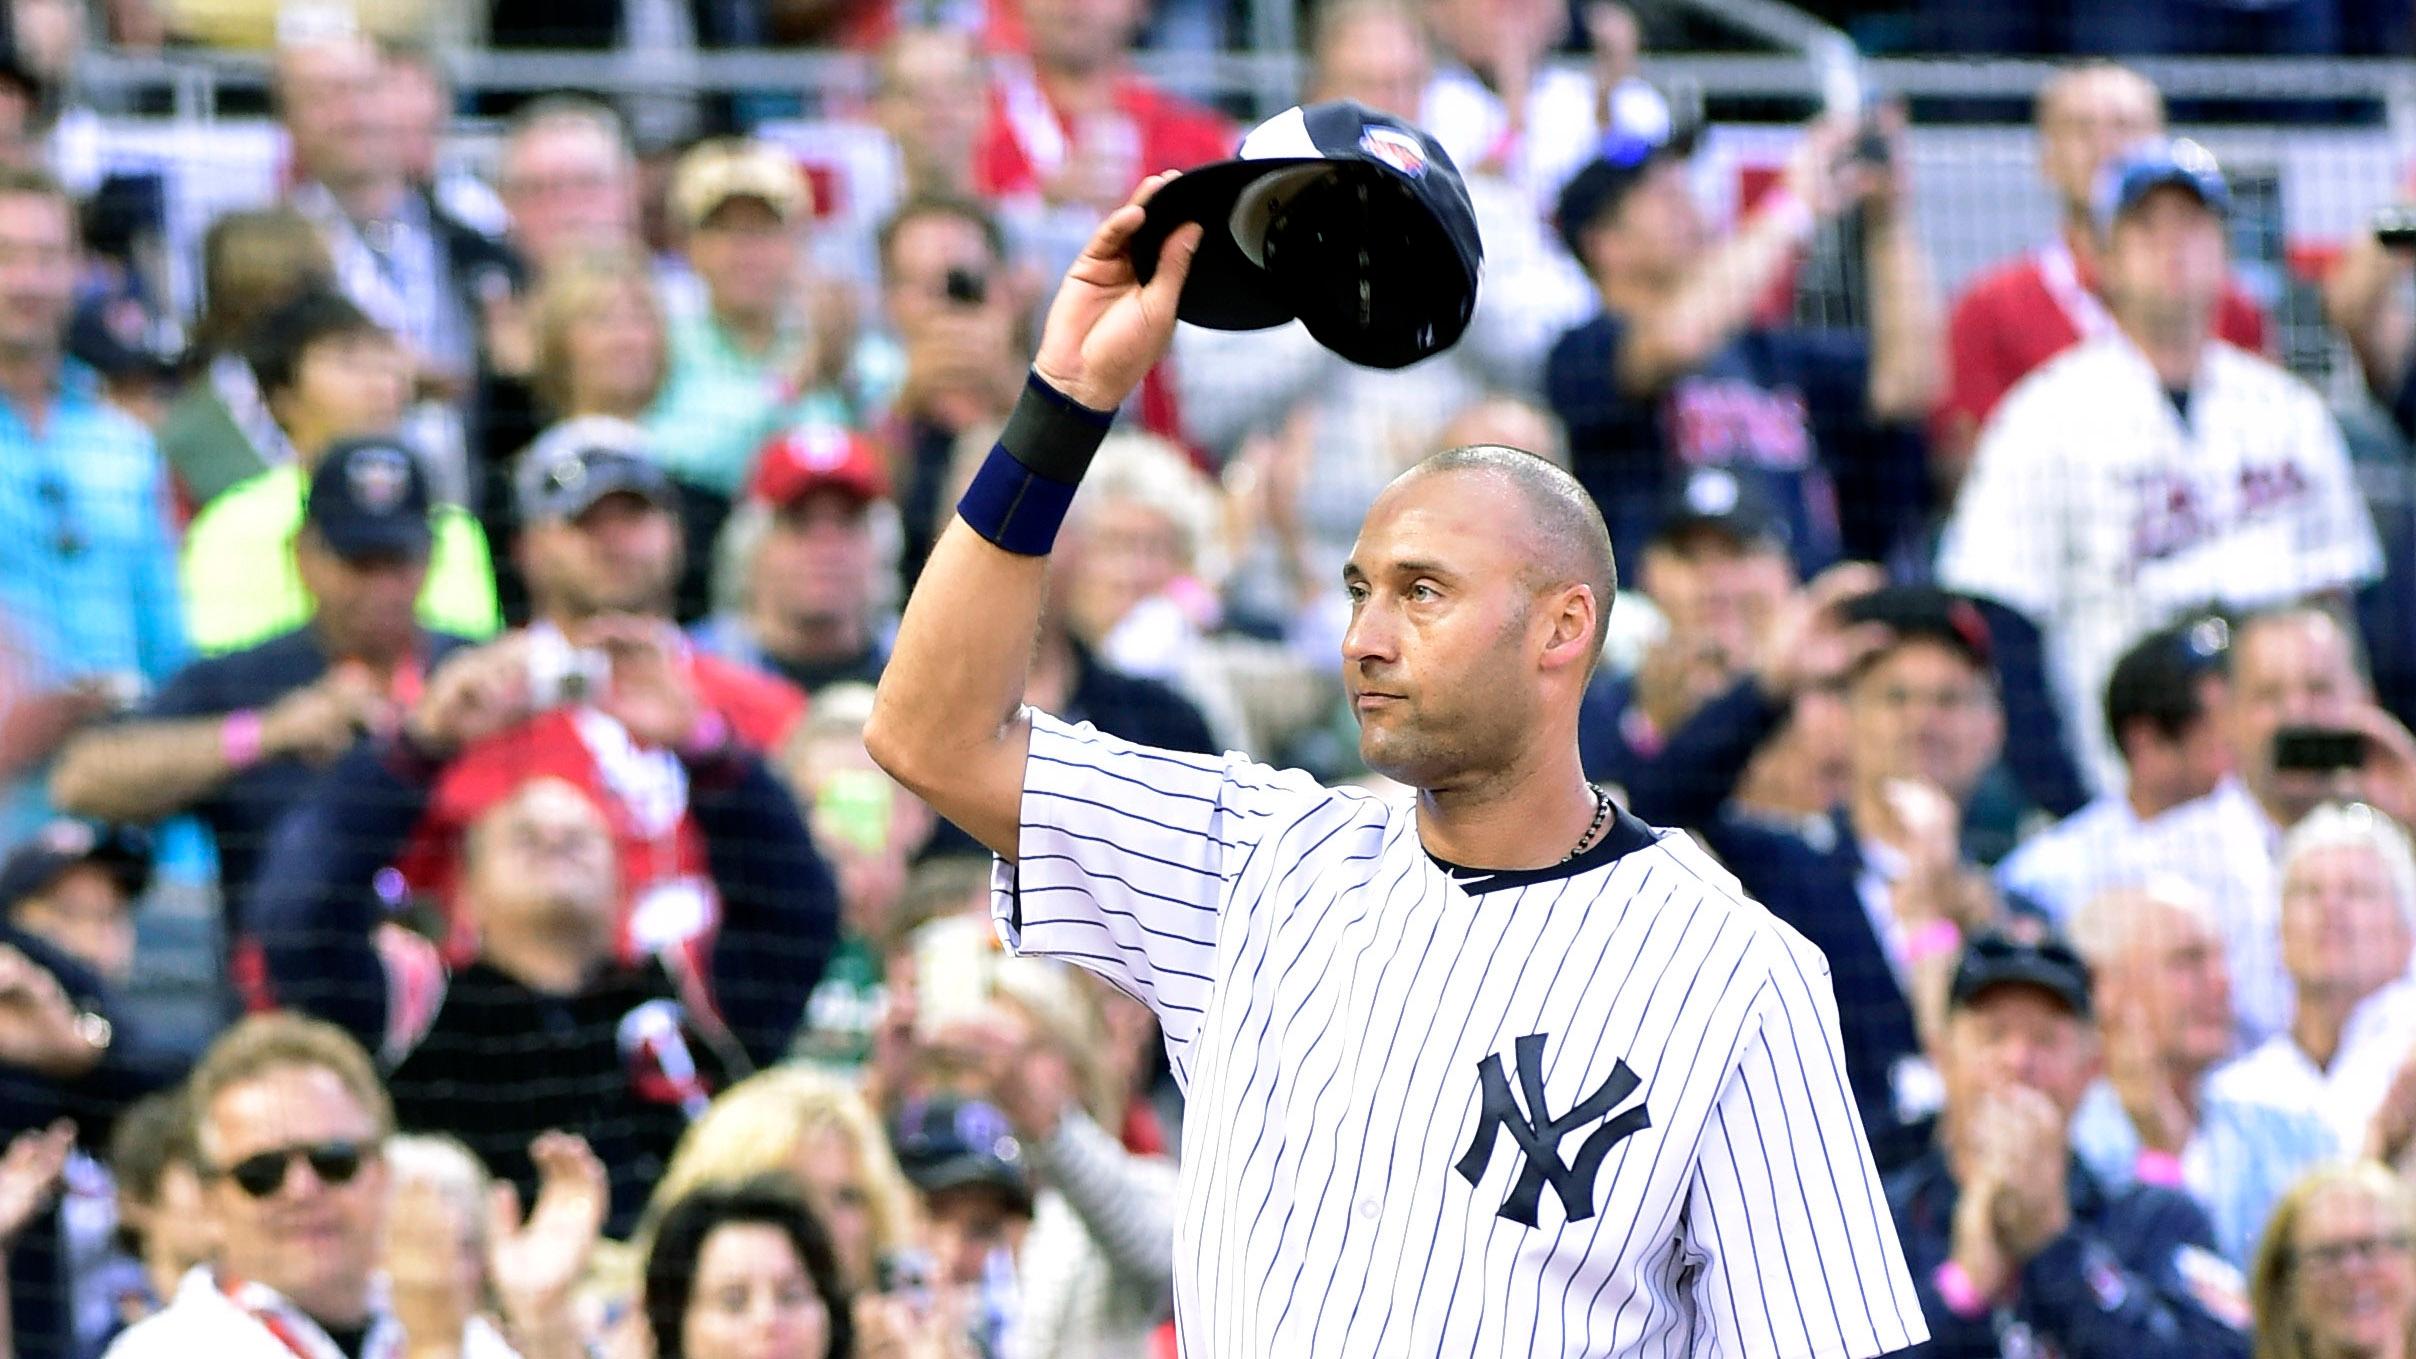 American League infielder Derek Jeter (2) of the New York Yankees waves to the crowd as he is replaced in the fourth inning during the 2014 MLB All Star Game at Target Field. / Scott Rovak - USA TODAY Sports